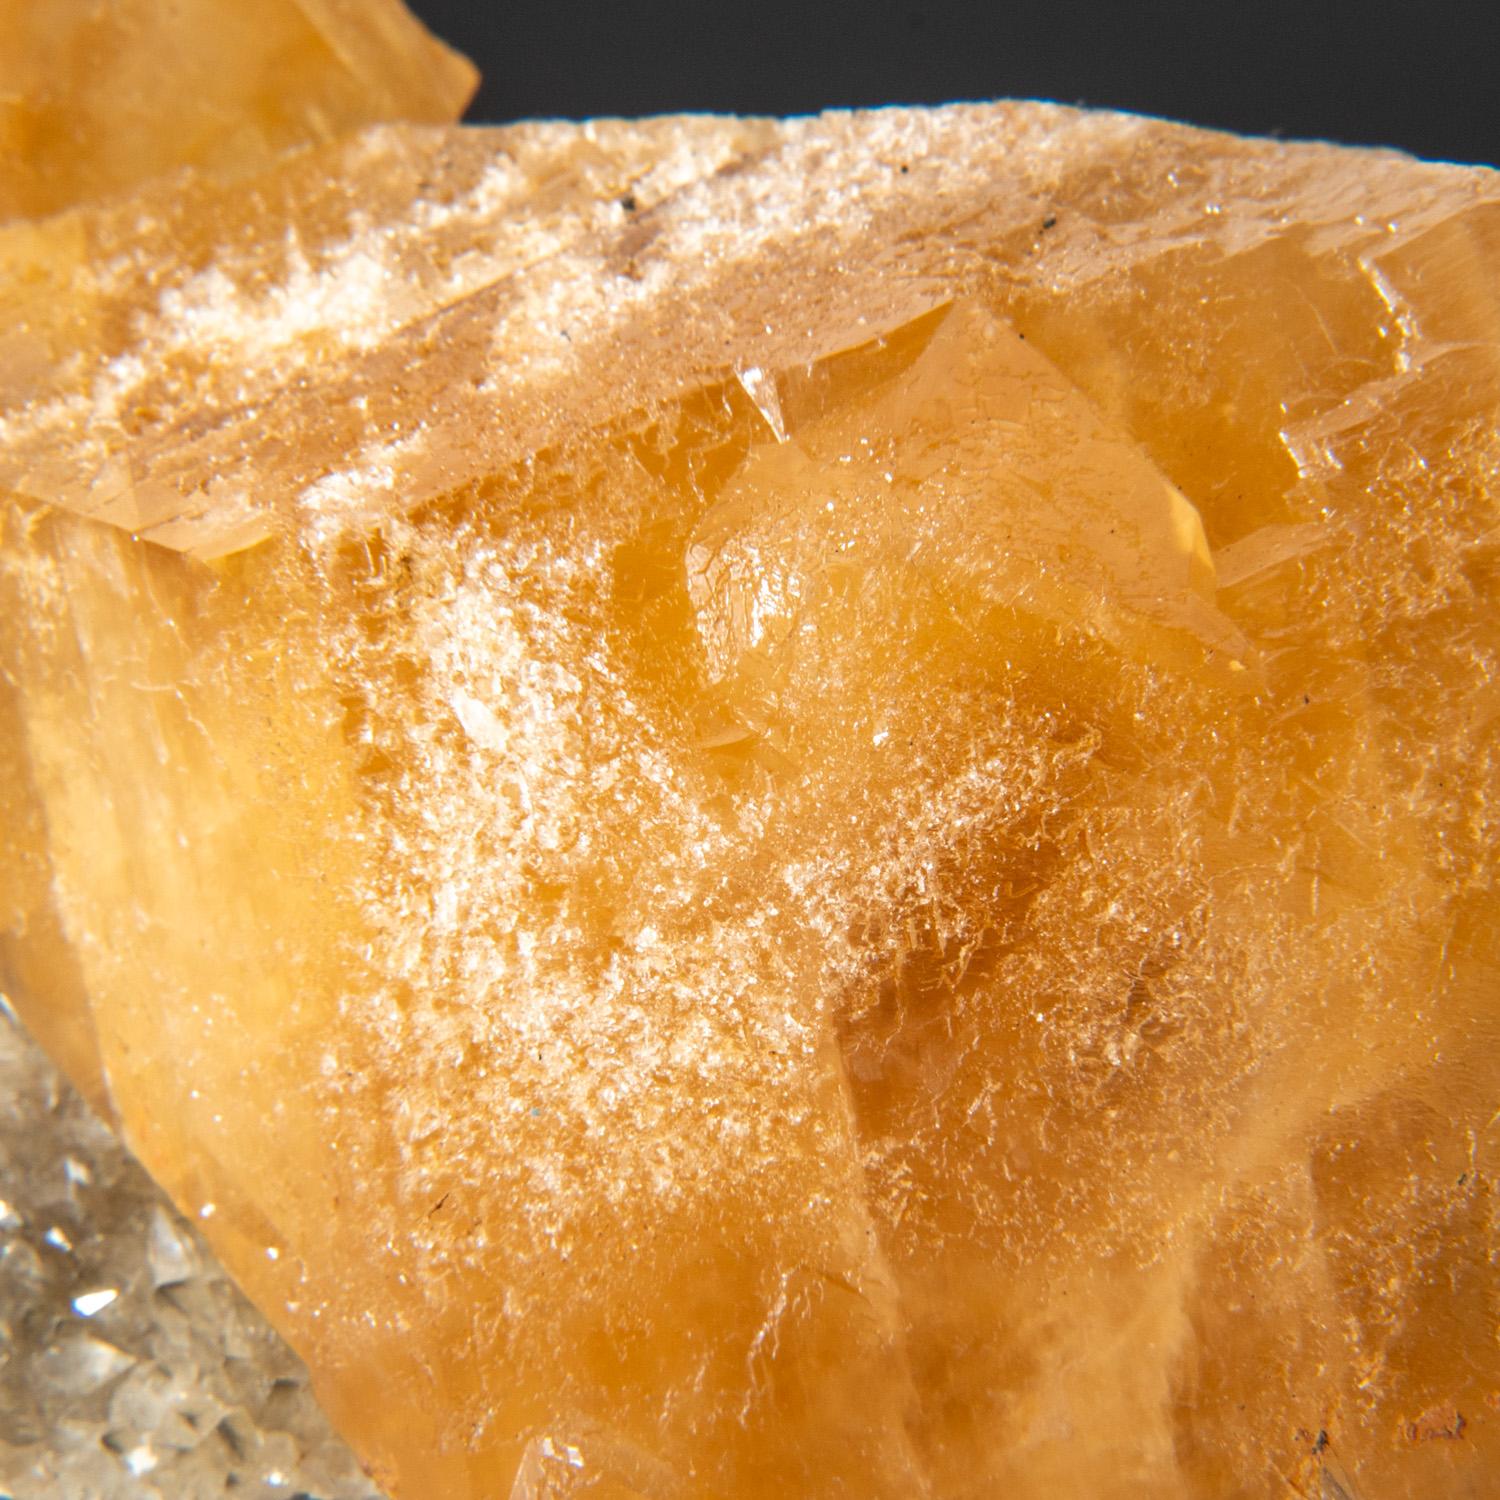 Crystal Golden Calcite from Elk Creek, Meade County, South Dakota For Sale